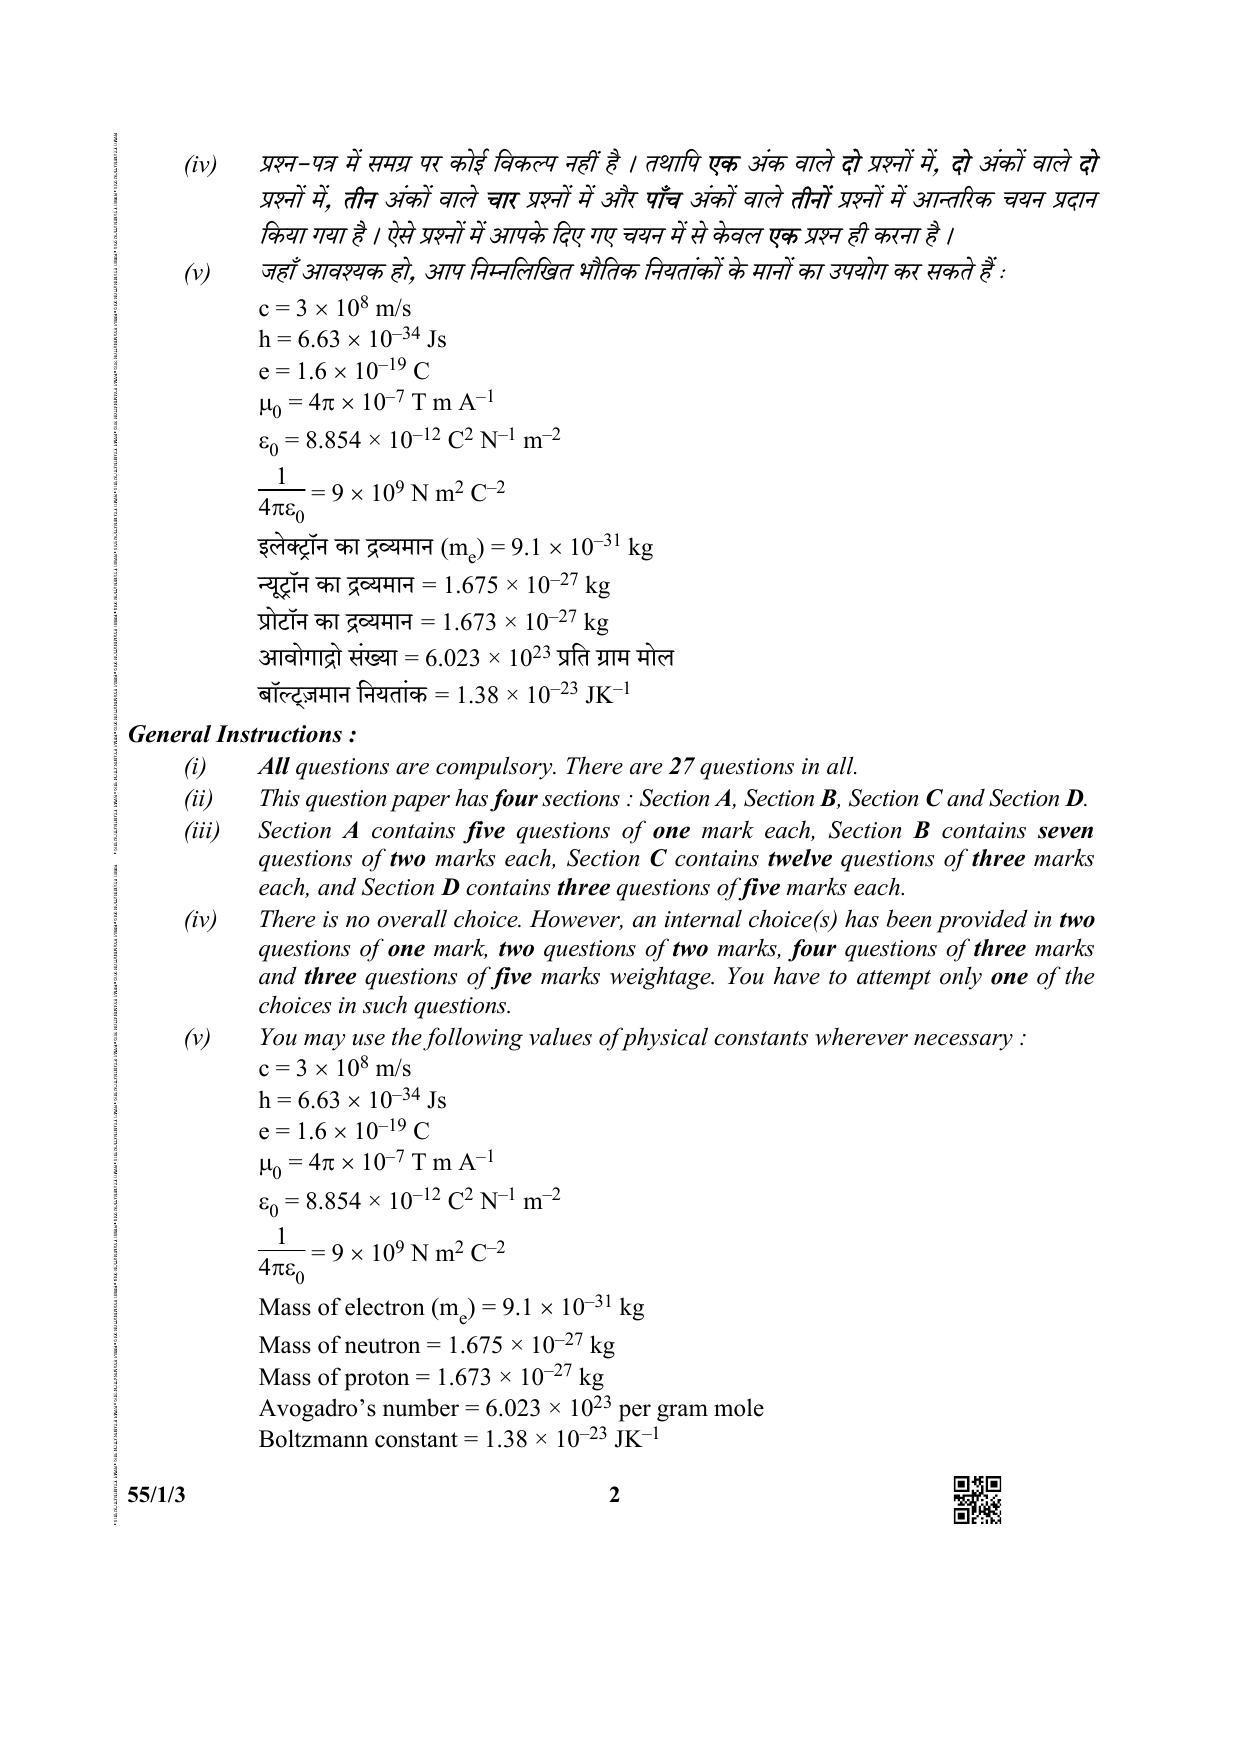 CBSE Class 12 55-1-3 (Physics) 2019 Question Paper - Page 2